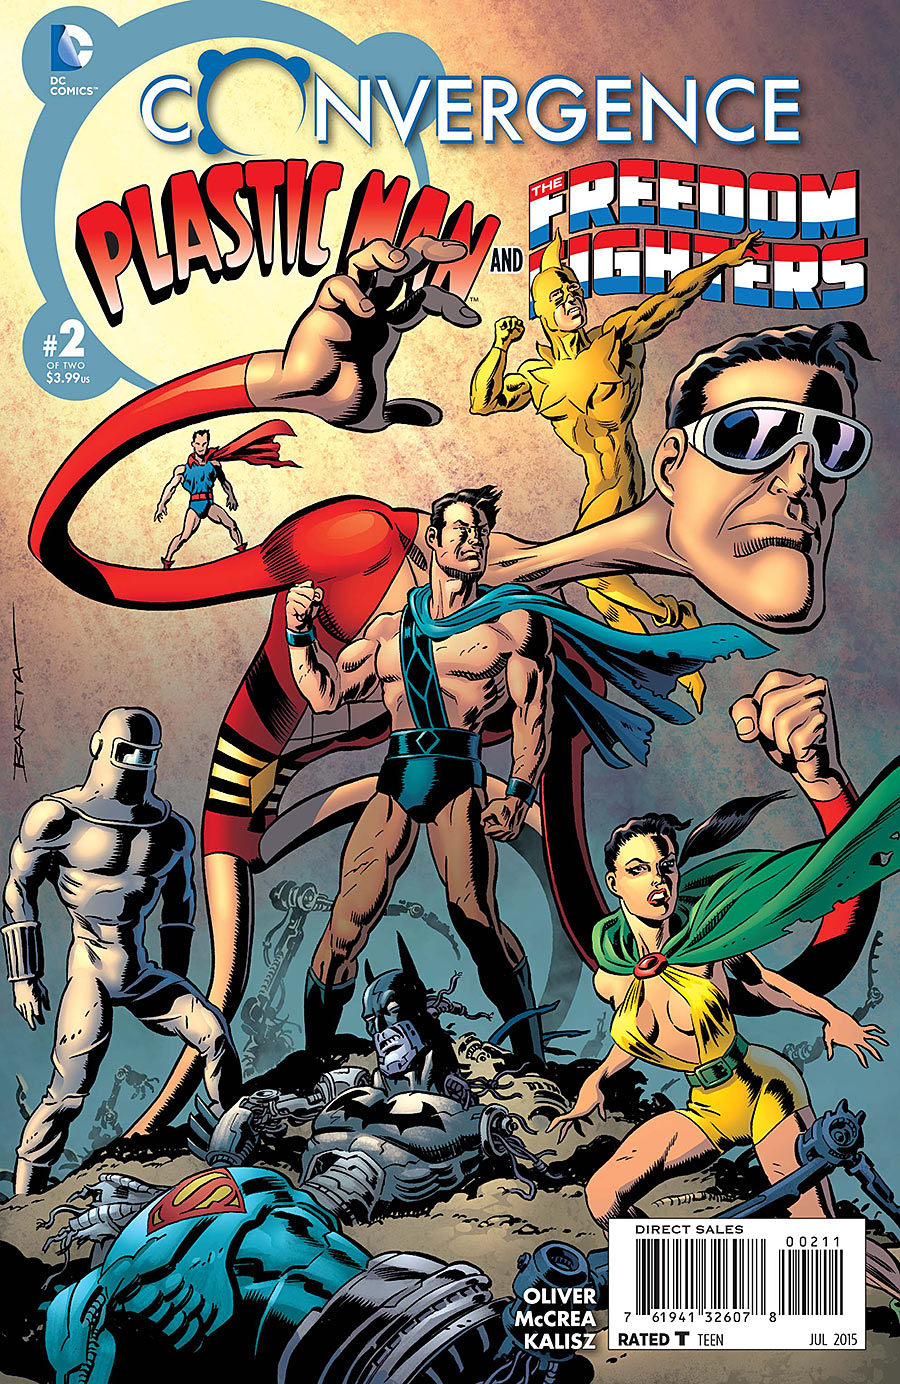 Convergence: Plastic Man and the Freedom Fighters Vol. 1 #2